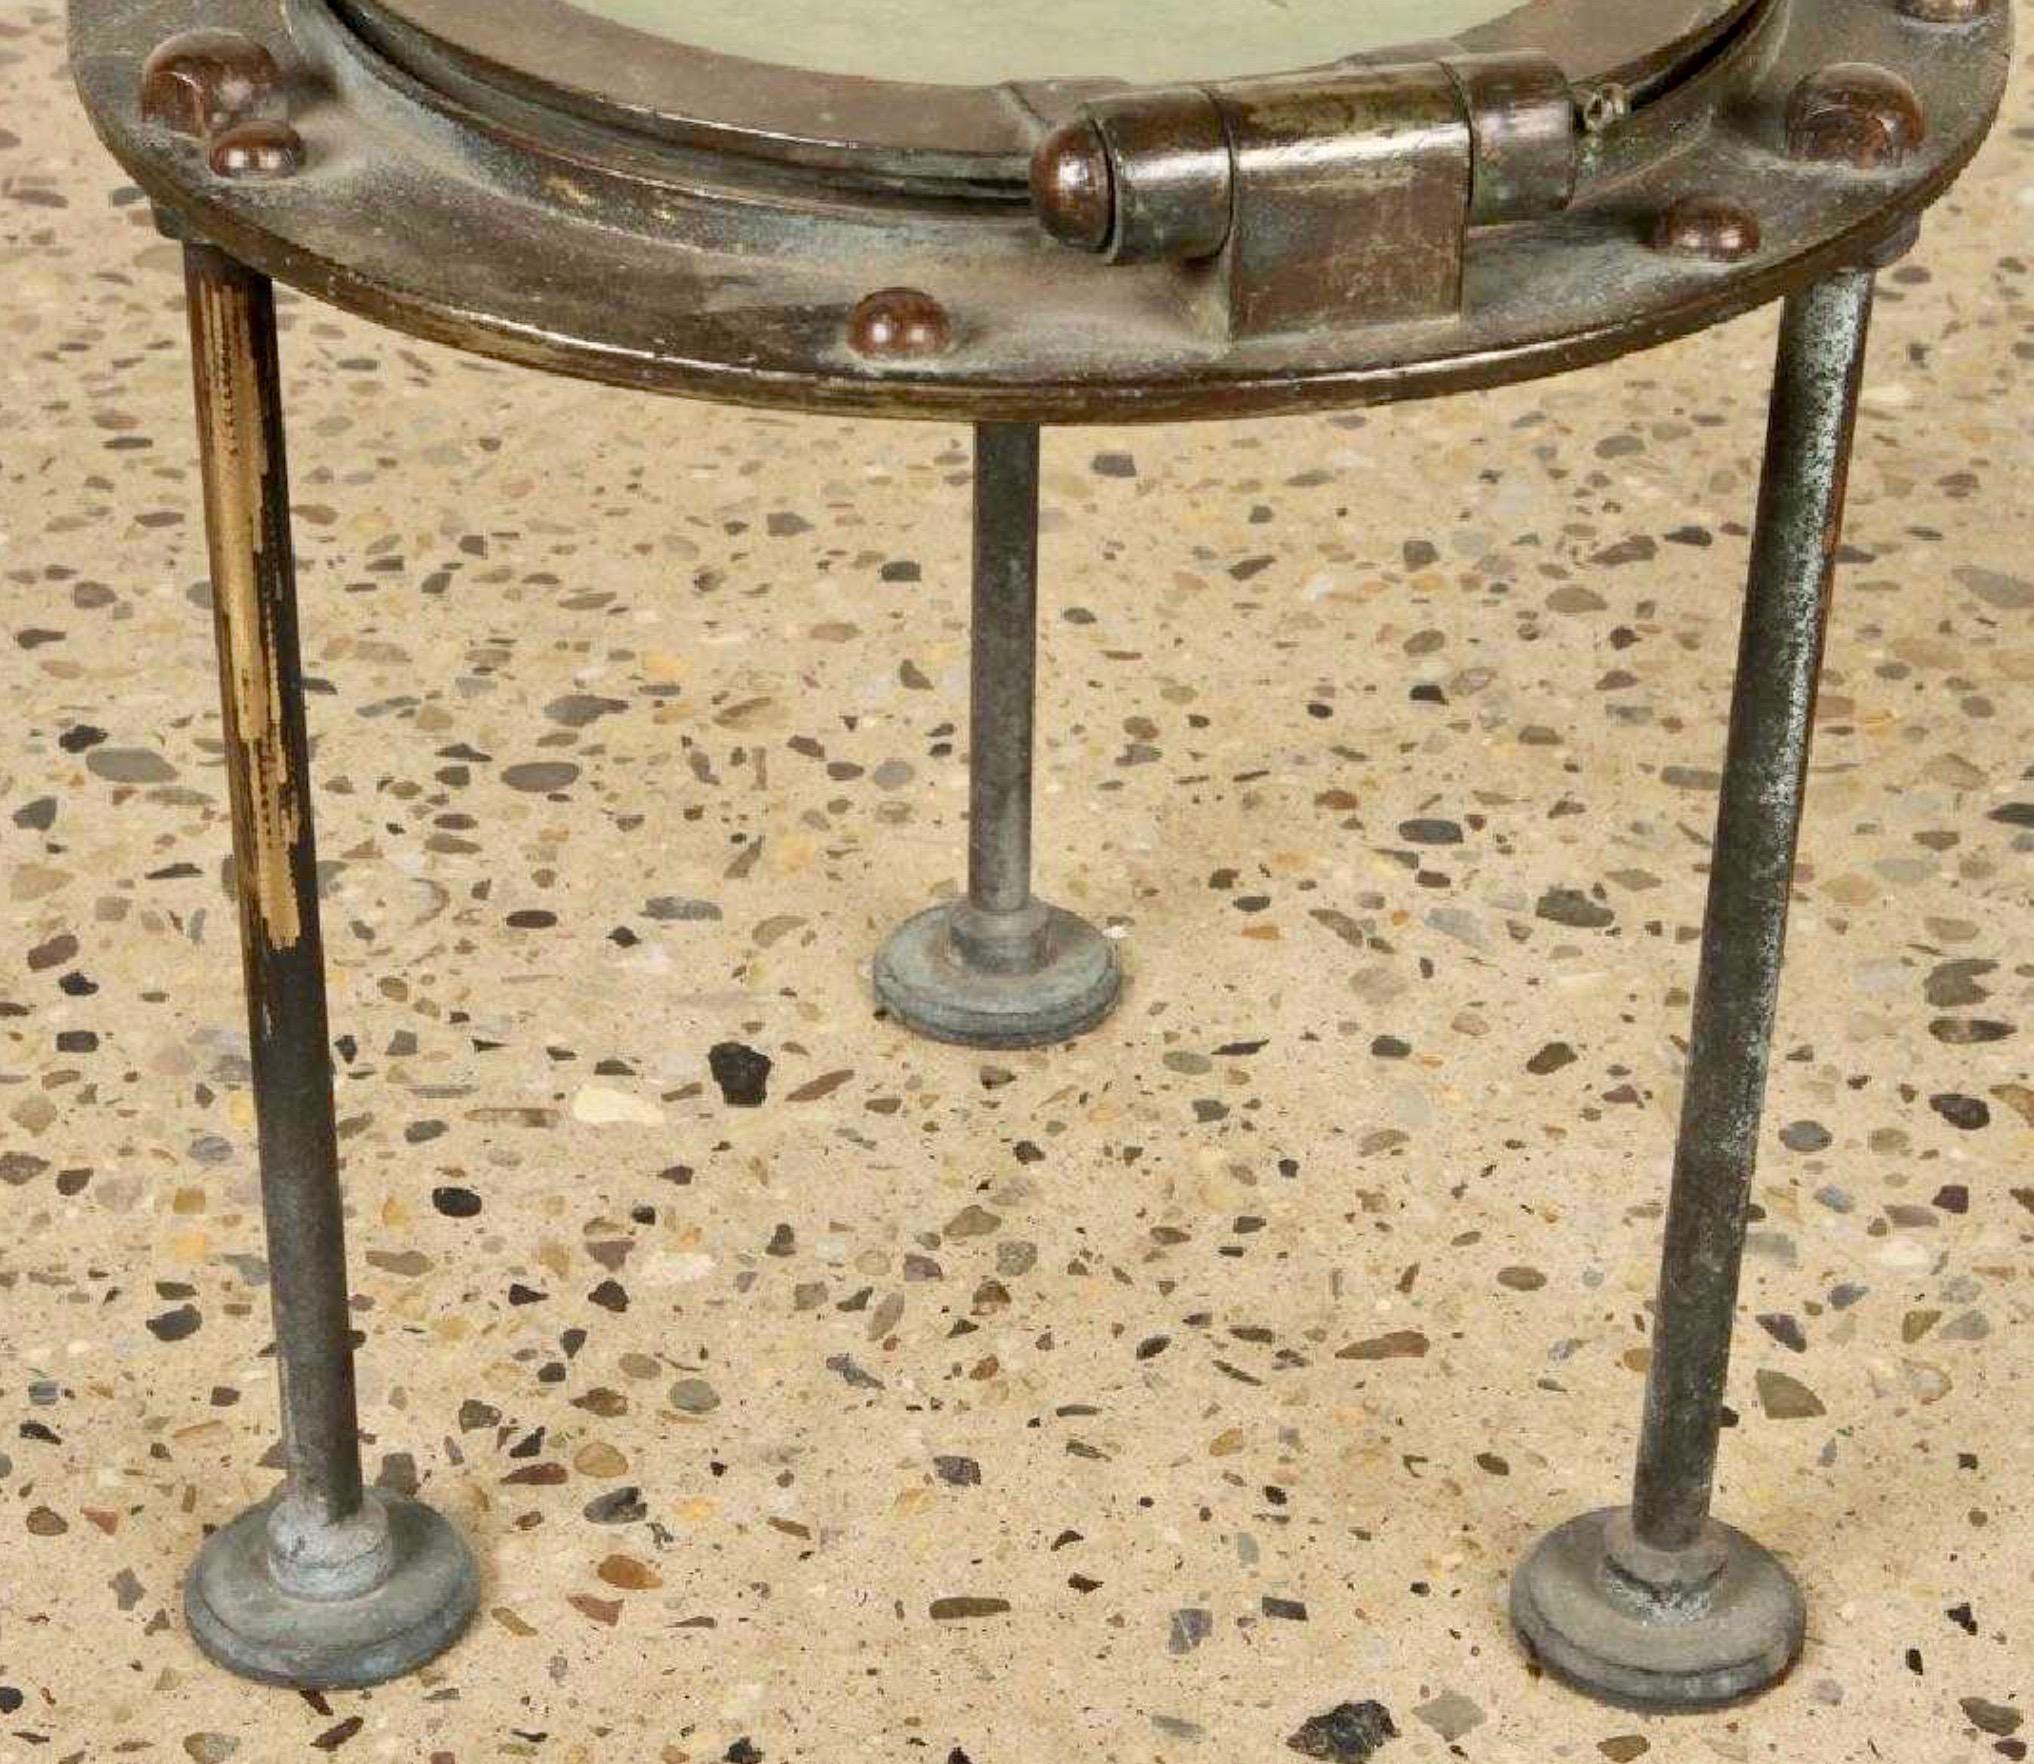 Interesting side table made from an old ship's porthole. Tripod legs. Bronze porthole with iron legs and brass hardware. Exceptionally well done. Original glass has patina with a frosted appearance. Great conversation piece. Good vintage condition.